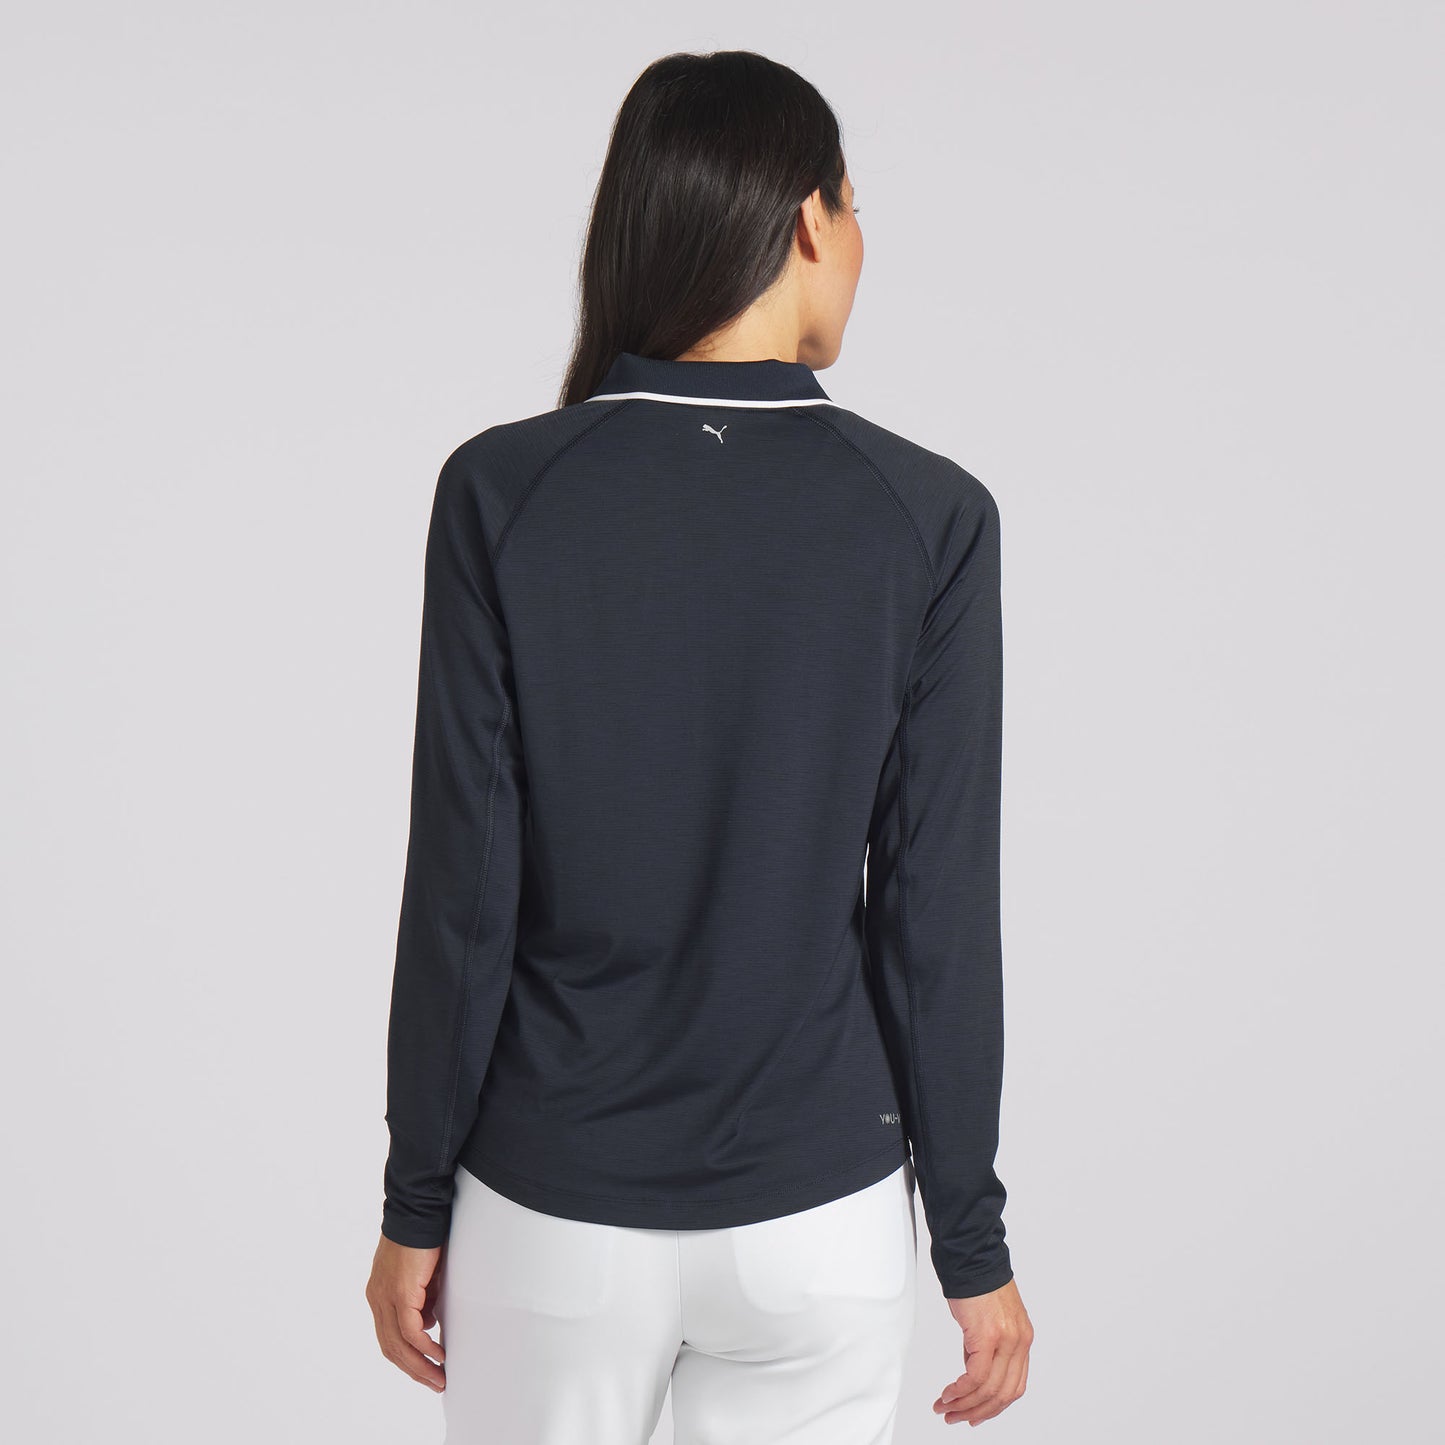 Puma Ladies Deep Navy You-V Long Sleeve Zip-Neck Top with UPF 50+